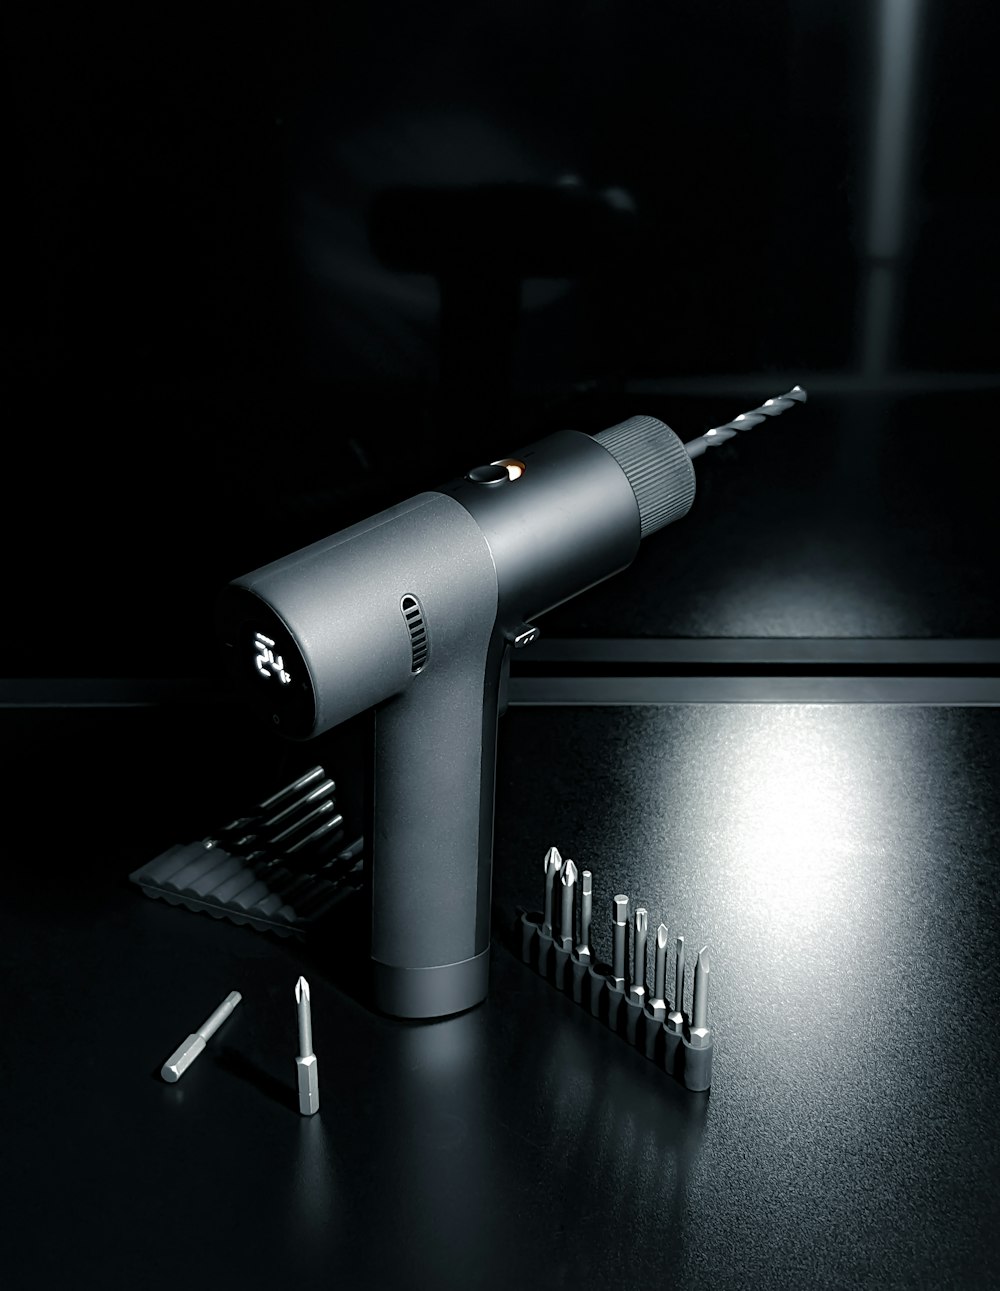 a microphone on a desk